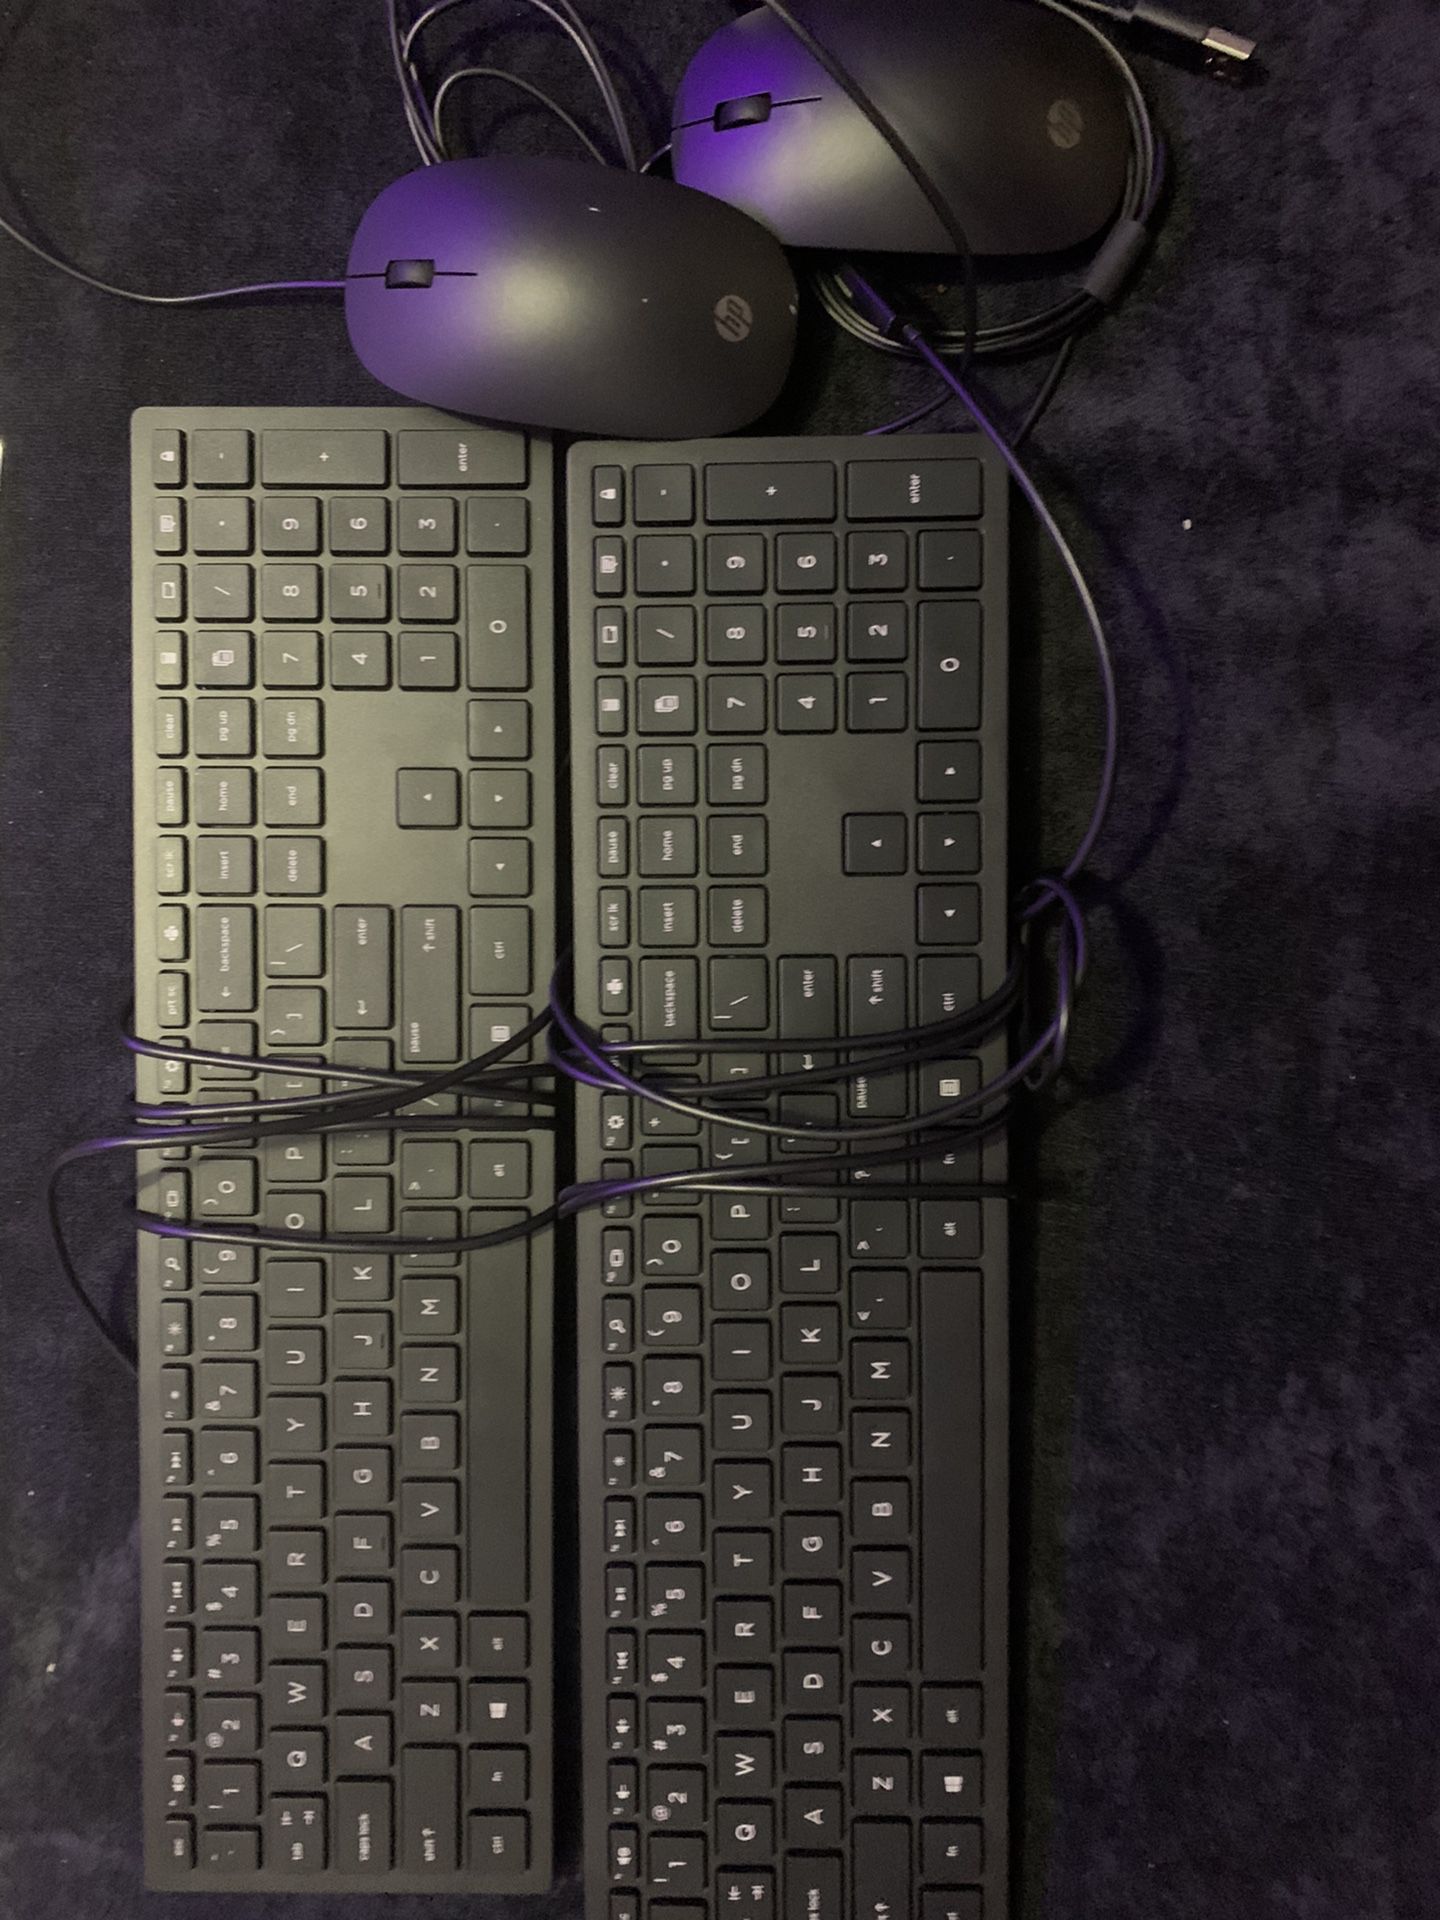 Two Keyboards and Two Mice